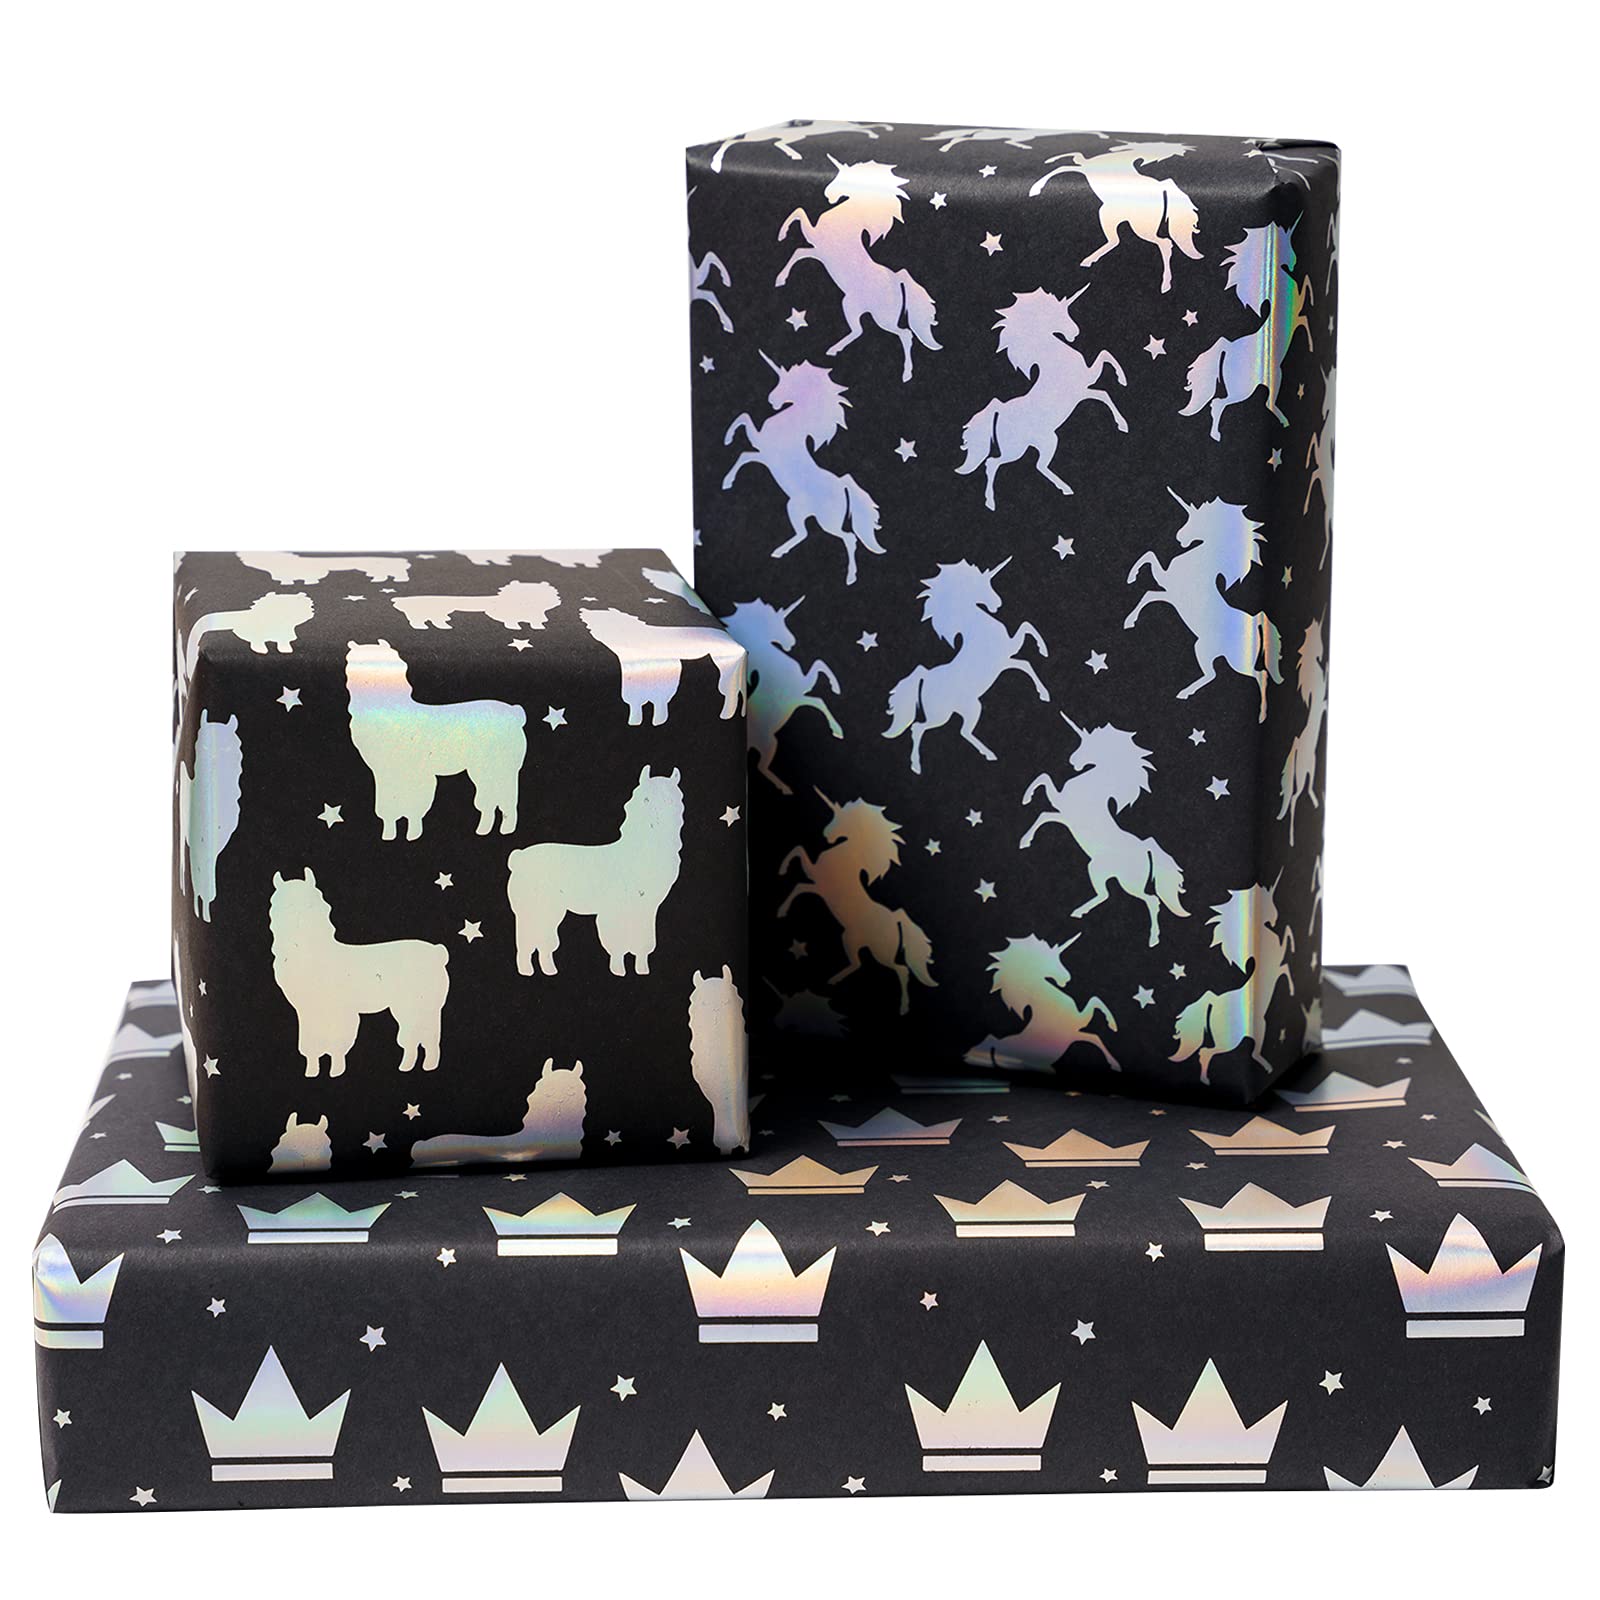 RUSPEPA Wrapping Paper, colorful Hot Silver Black Kraft Paper - Unicorn,  Alpaca and crown Design - 17.5 x 30 Inches Each Sheet